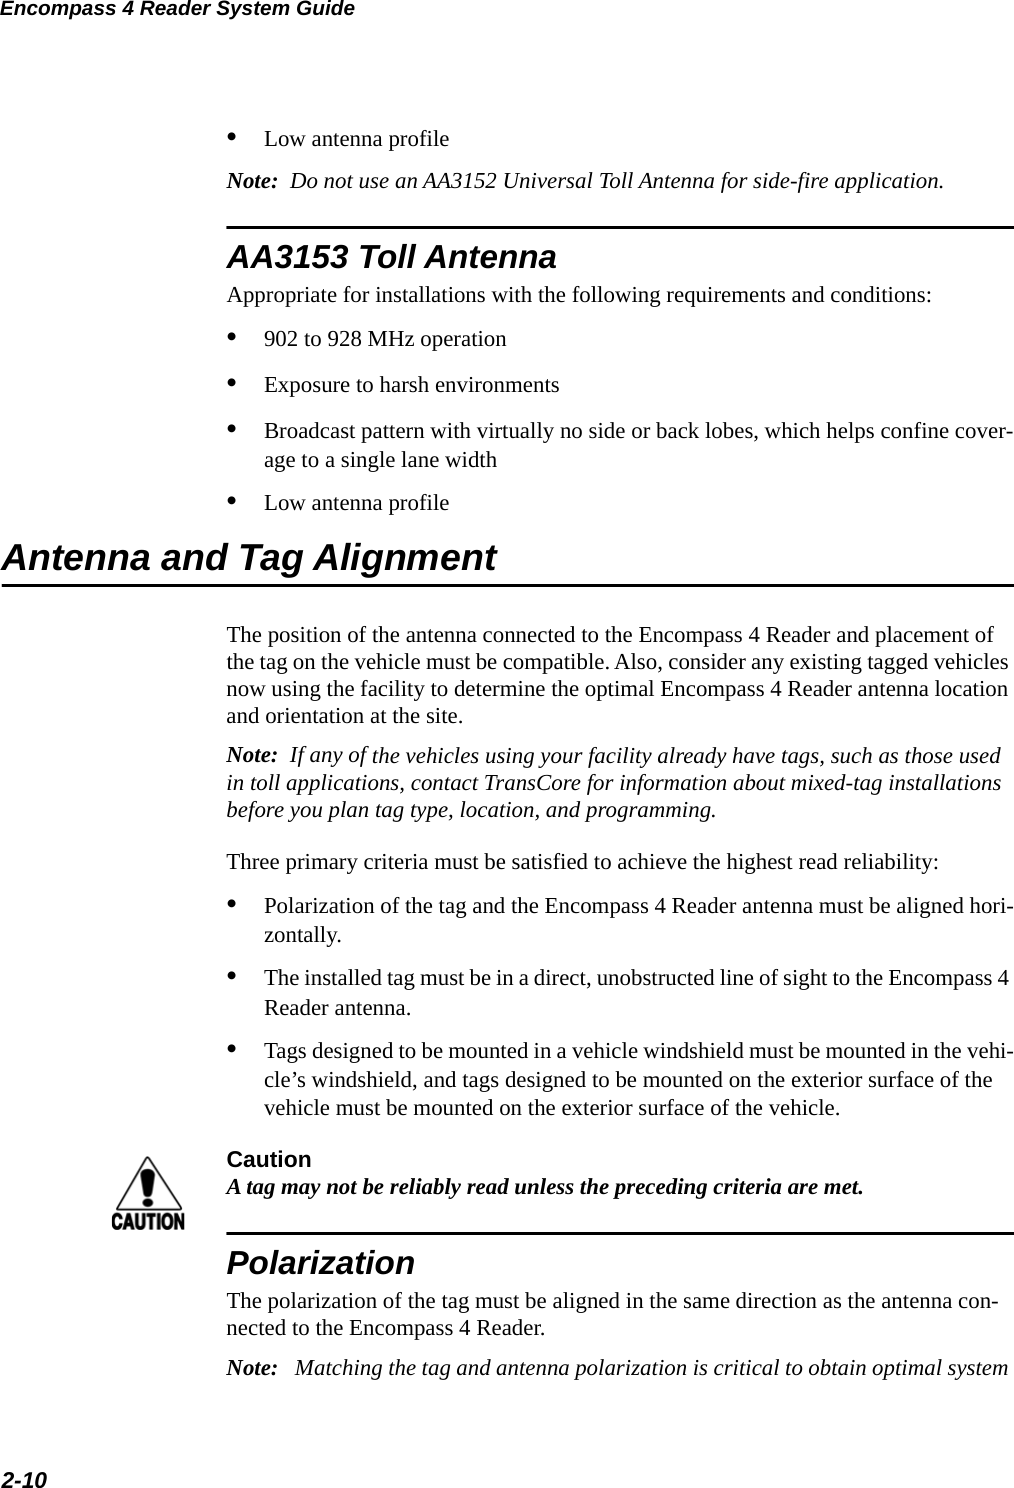 Encompass 4 Reader System Guide2-10•Low antenna profileNote:  Do not use an AA3152 Universal Toll Antenna for side-fire application.AA3153 Toll AntennaAppropriate for installations with the following requirements and conditions:•902 to 928 MHz operation•Exposure to harsh environments•Broadcast pattern with virtually no side or back lobes, which helps confine cover-age to a single lane width •Low antenna profileAntenna and Tag AlignmentThe position of the antenna connected to the Encompass 4 Reader and placement of the tag on the vehicle must be compatible. Also, consider any existing tagged vehicles now using the facility to determine the optimal Encompass 4 Reader antenna location and orientation at the site.Note:  If any of the vehicles using your facility already have tags, such as those used in toll applications, contact TransCore for information about mixed-tag installations before you plan tag type, location, and programming.Three primary criteria must be satisfied to achieve the highest read reliability:•Polarization of the tag and the Encompass 4 Reader antenna must be aligned hori-zontally.•The installed tag must be in a direct, unobstructed line of sight to the Encompass 4 Reader antenna.•Tags designed to be mounted in a vehicle windshield must be mounted in the vehi-cle’s windshield, and tags designed to be mounted on the exterior surface of the vehicle must be mounted on the exterior surface of the vehicle.CautionA tag may not be reliably read unless the preceding criteria are met.PolarizationThe polarization of the tag must be aligned in the same direction as the antenna con-nected to the Encompass 4 Reader.Note:   Matching the tag and antenna polarization is critical to obtain optimal system 